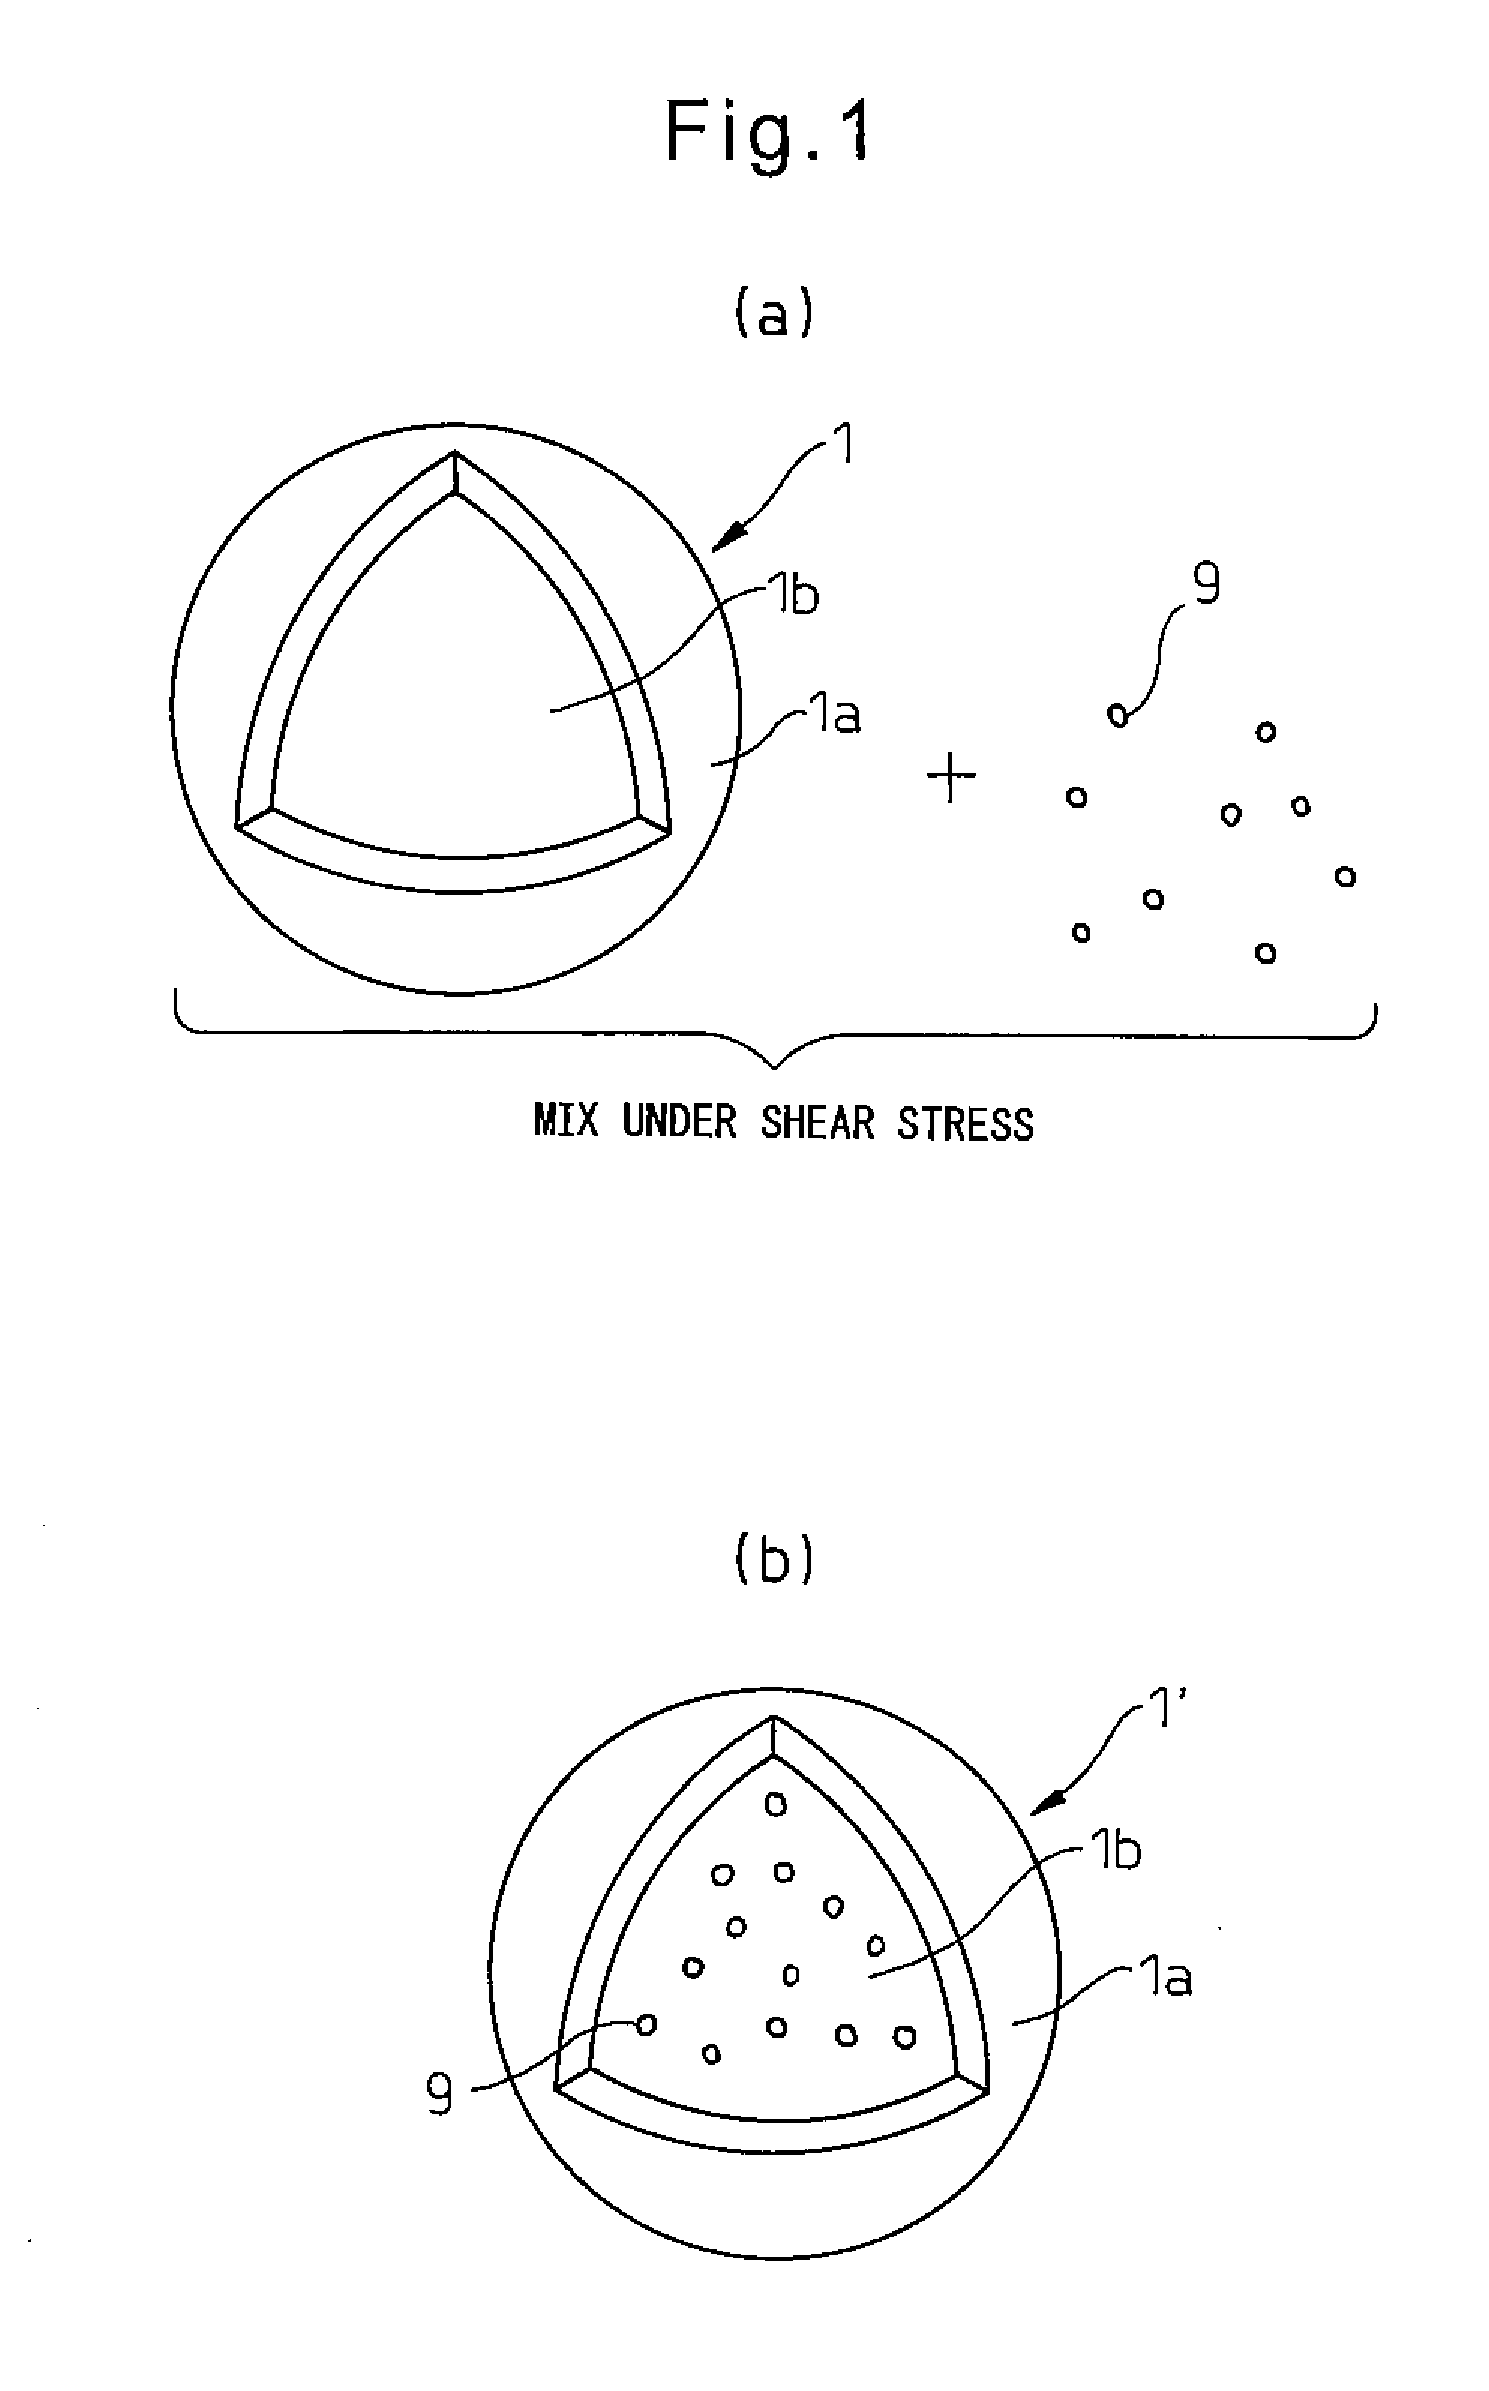 Substance-encapsulating vesicle and process for producing the same